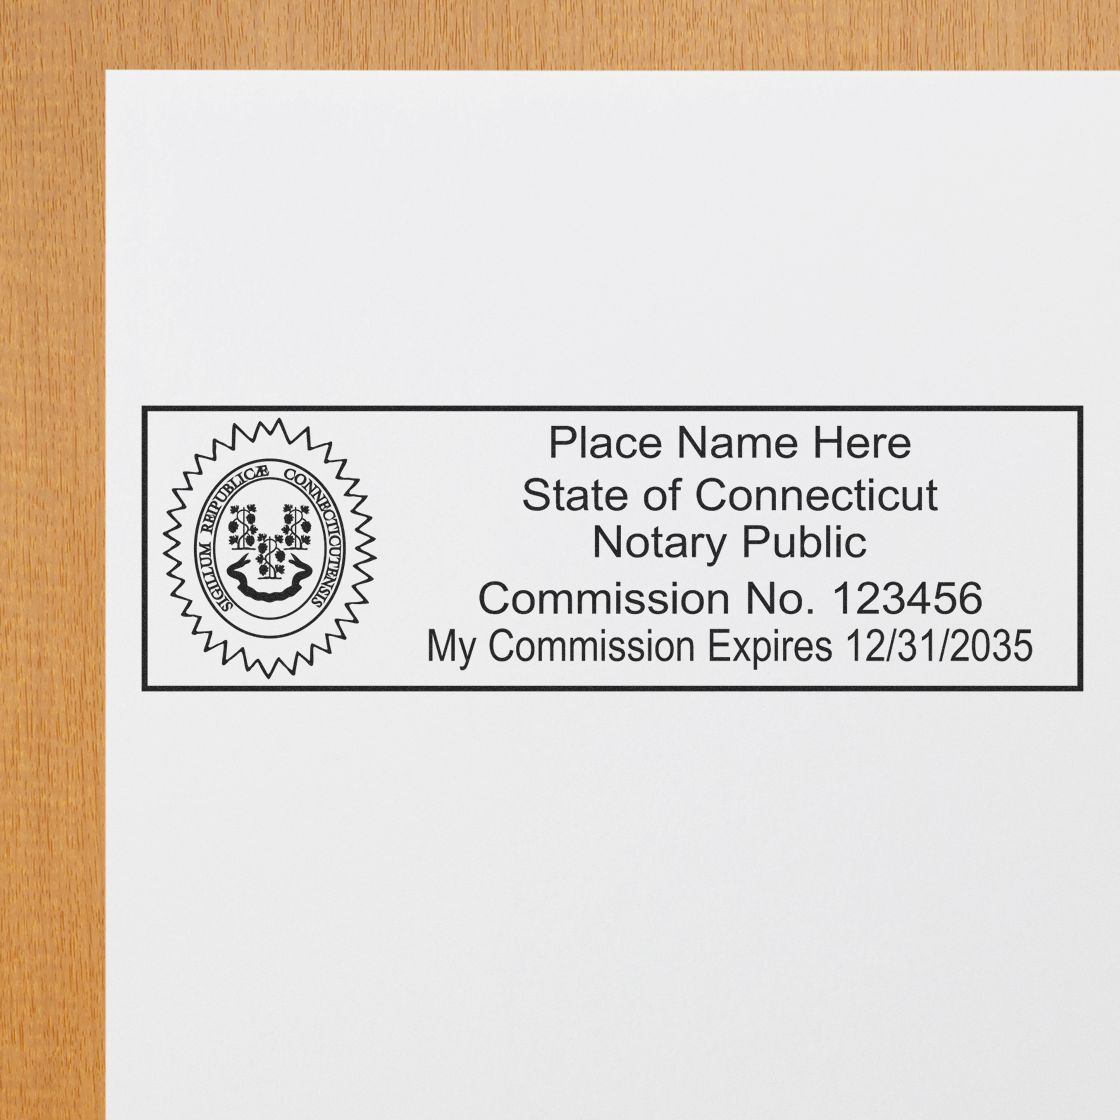 A lifestyle photo showing a stamped image of the MaxLight Premium Pre-Inked Connecticut State Seal Notarial Stamp on a piece of paper